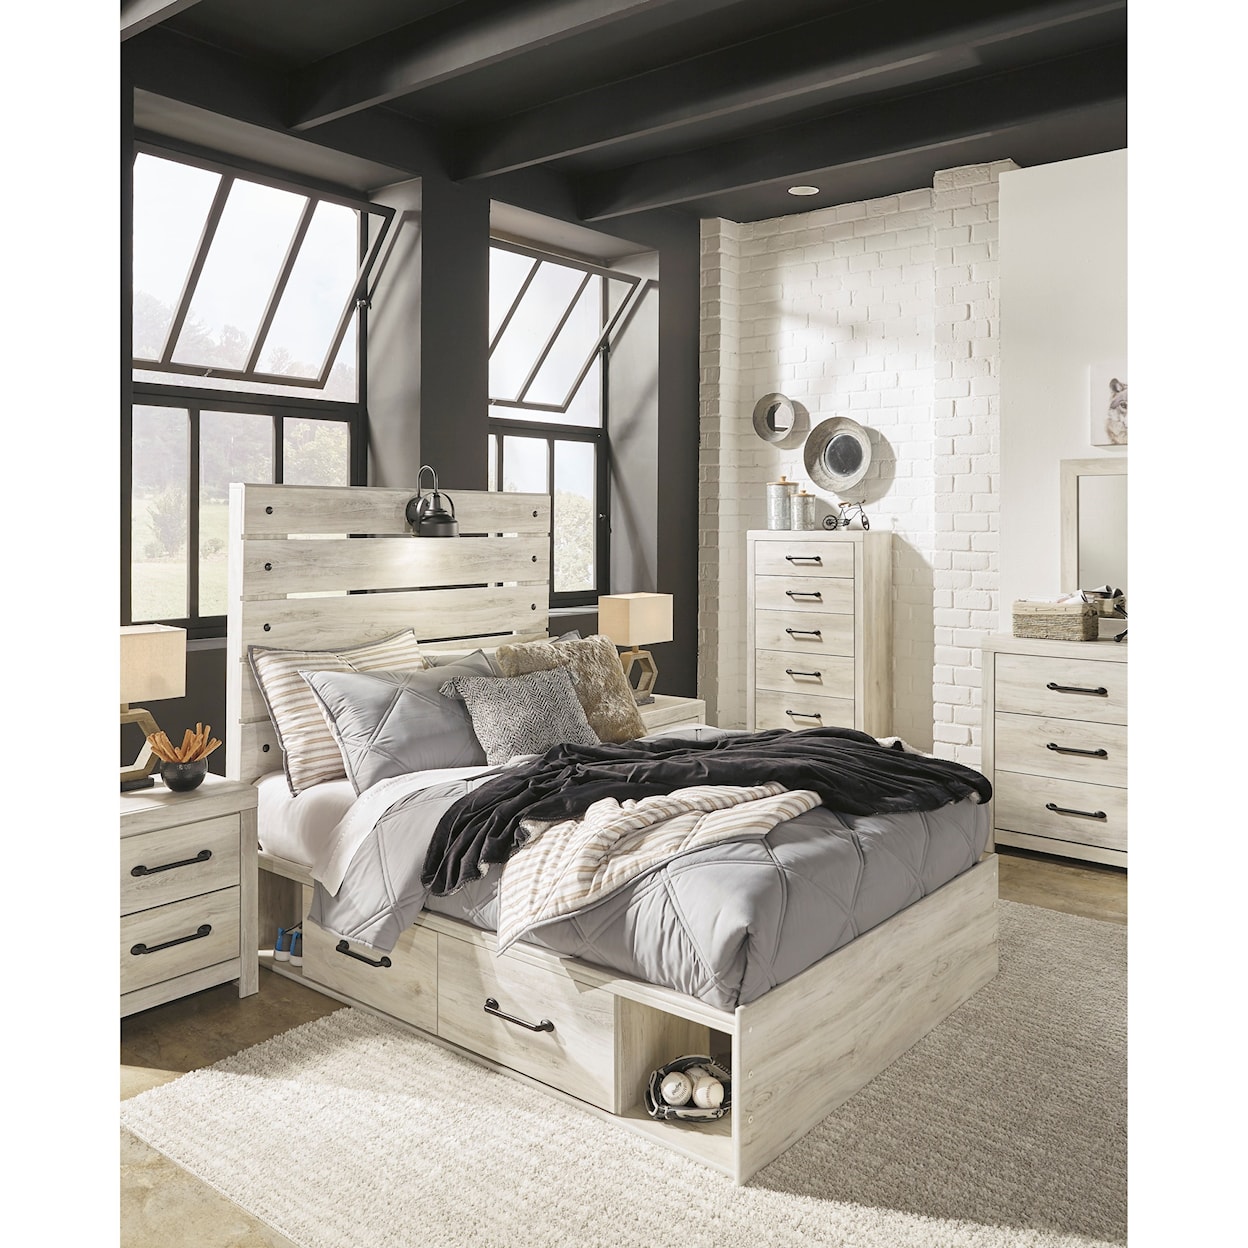 Signature Design by Ashley Cambeck Full Storage Bed with 4 Drawers